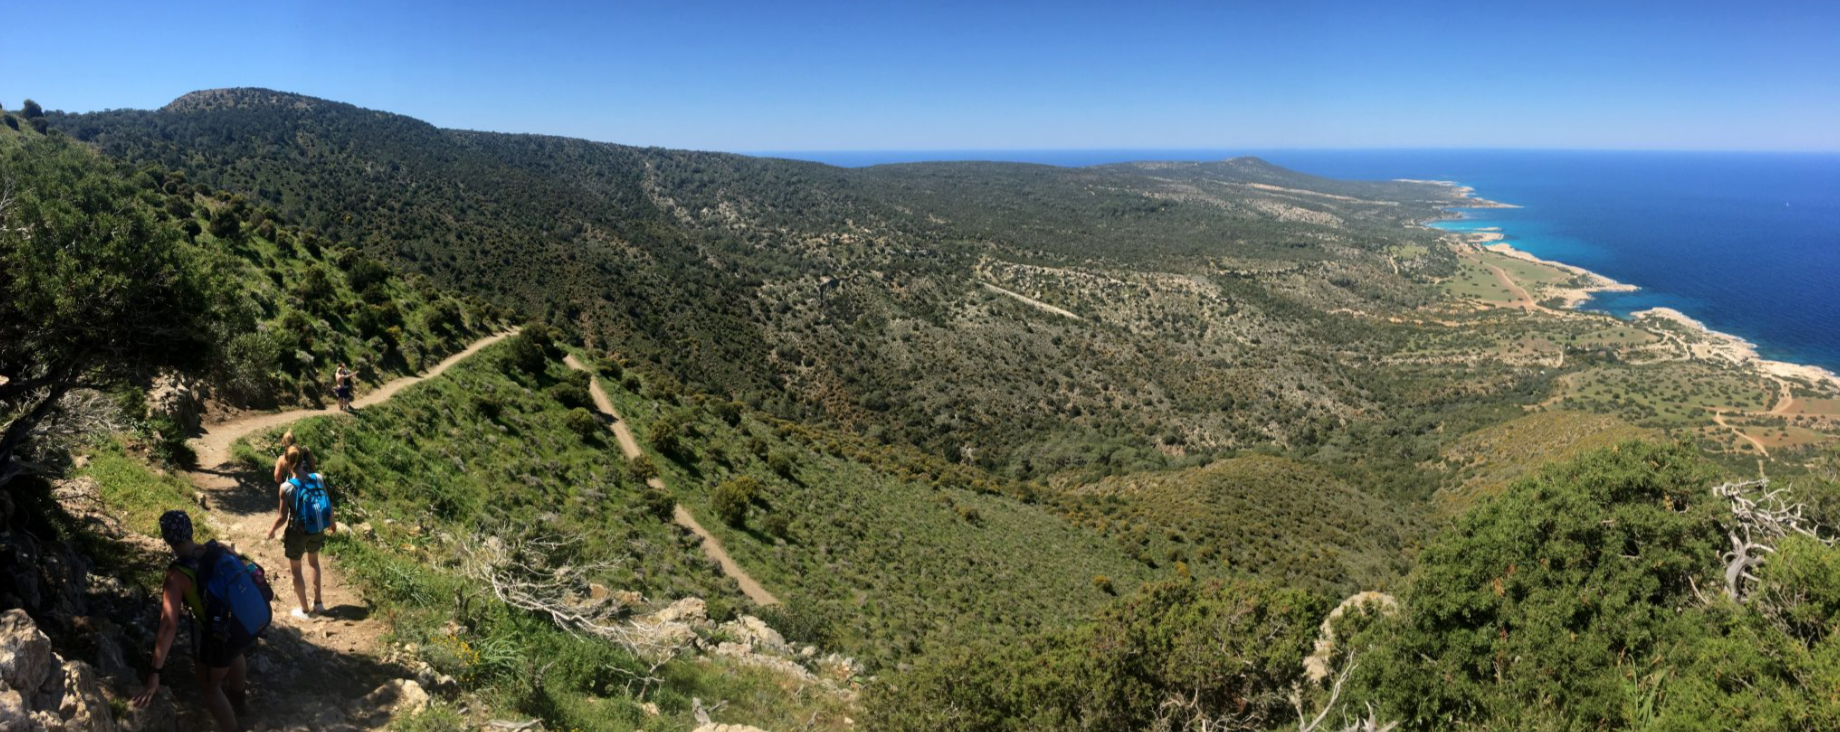 feature paul view over akamas